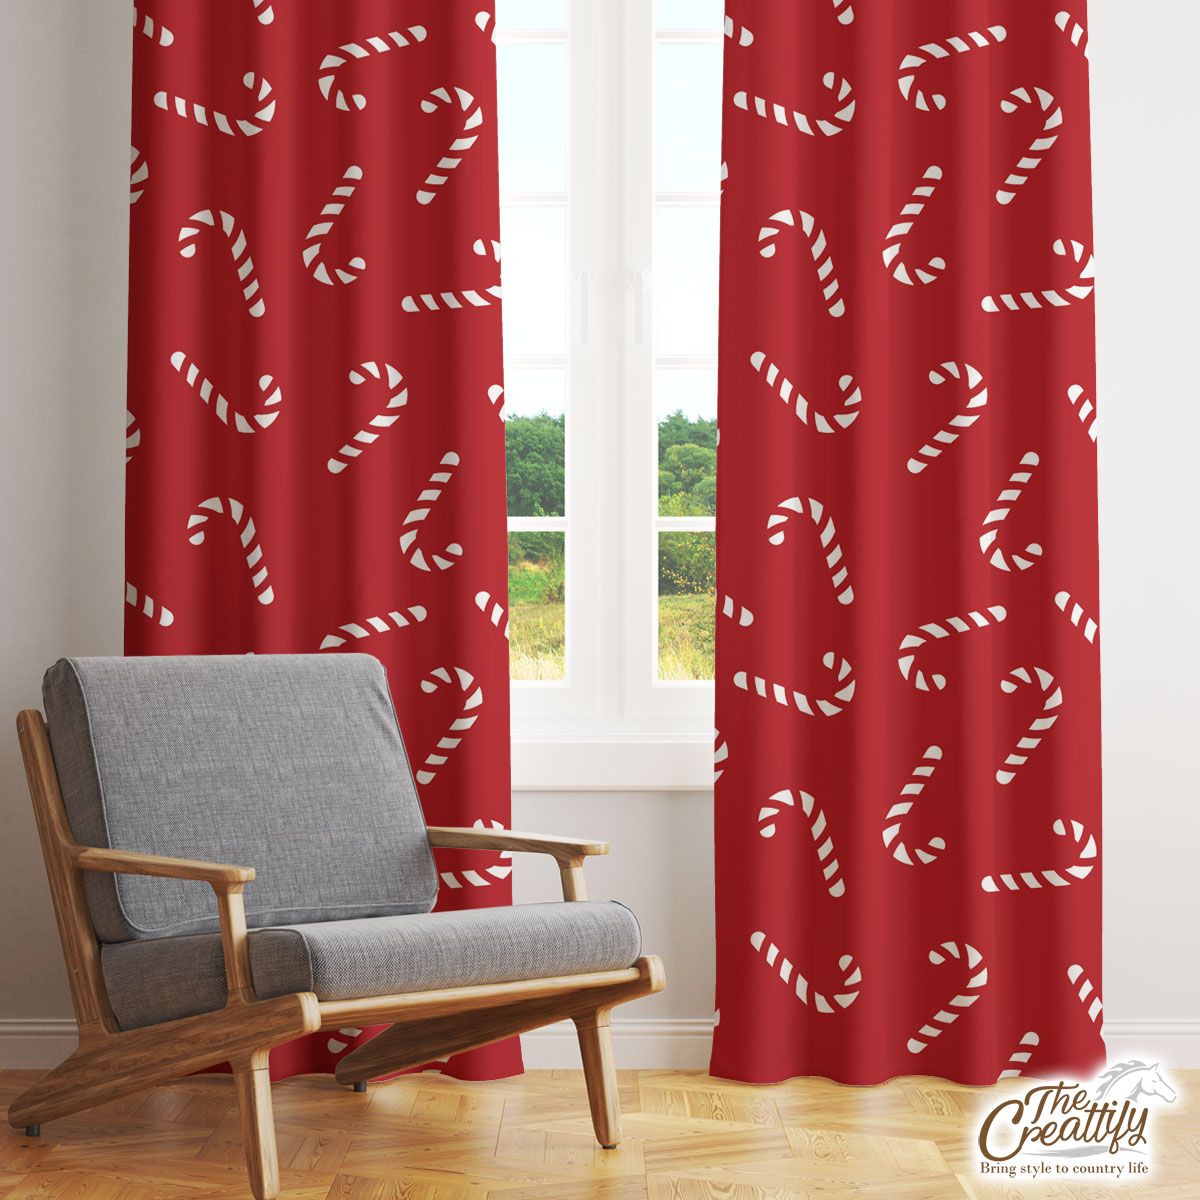 Happy Christmas With Candy Canes Seamless Red Pattern Window Curtain